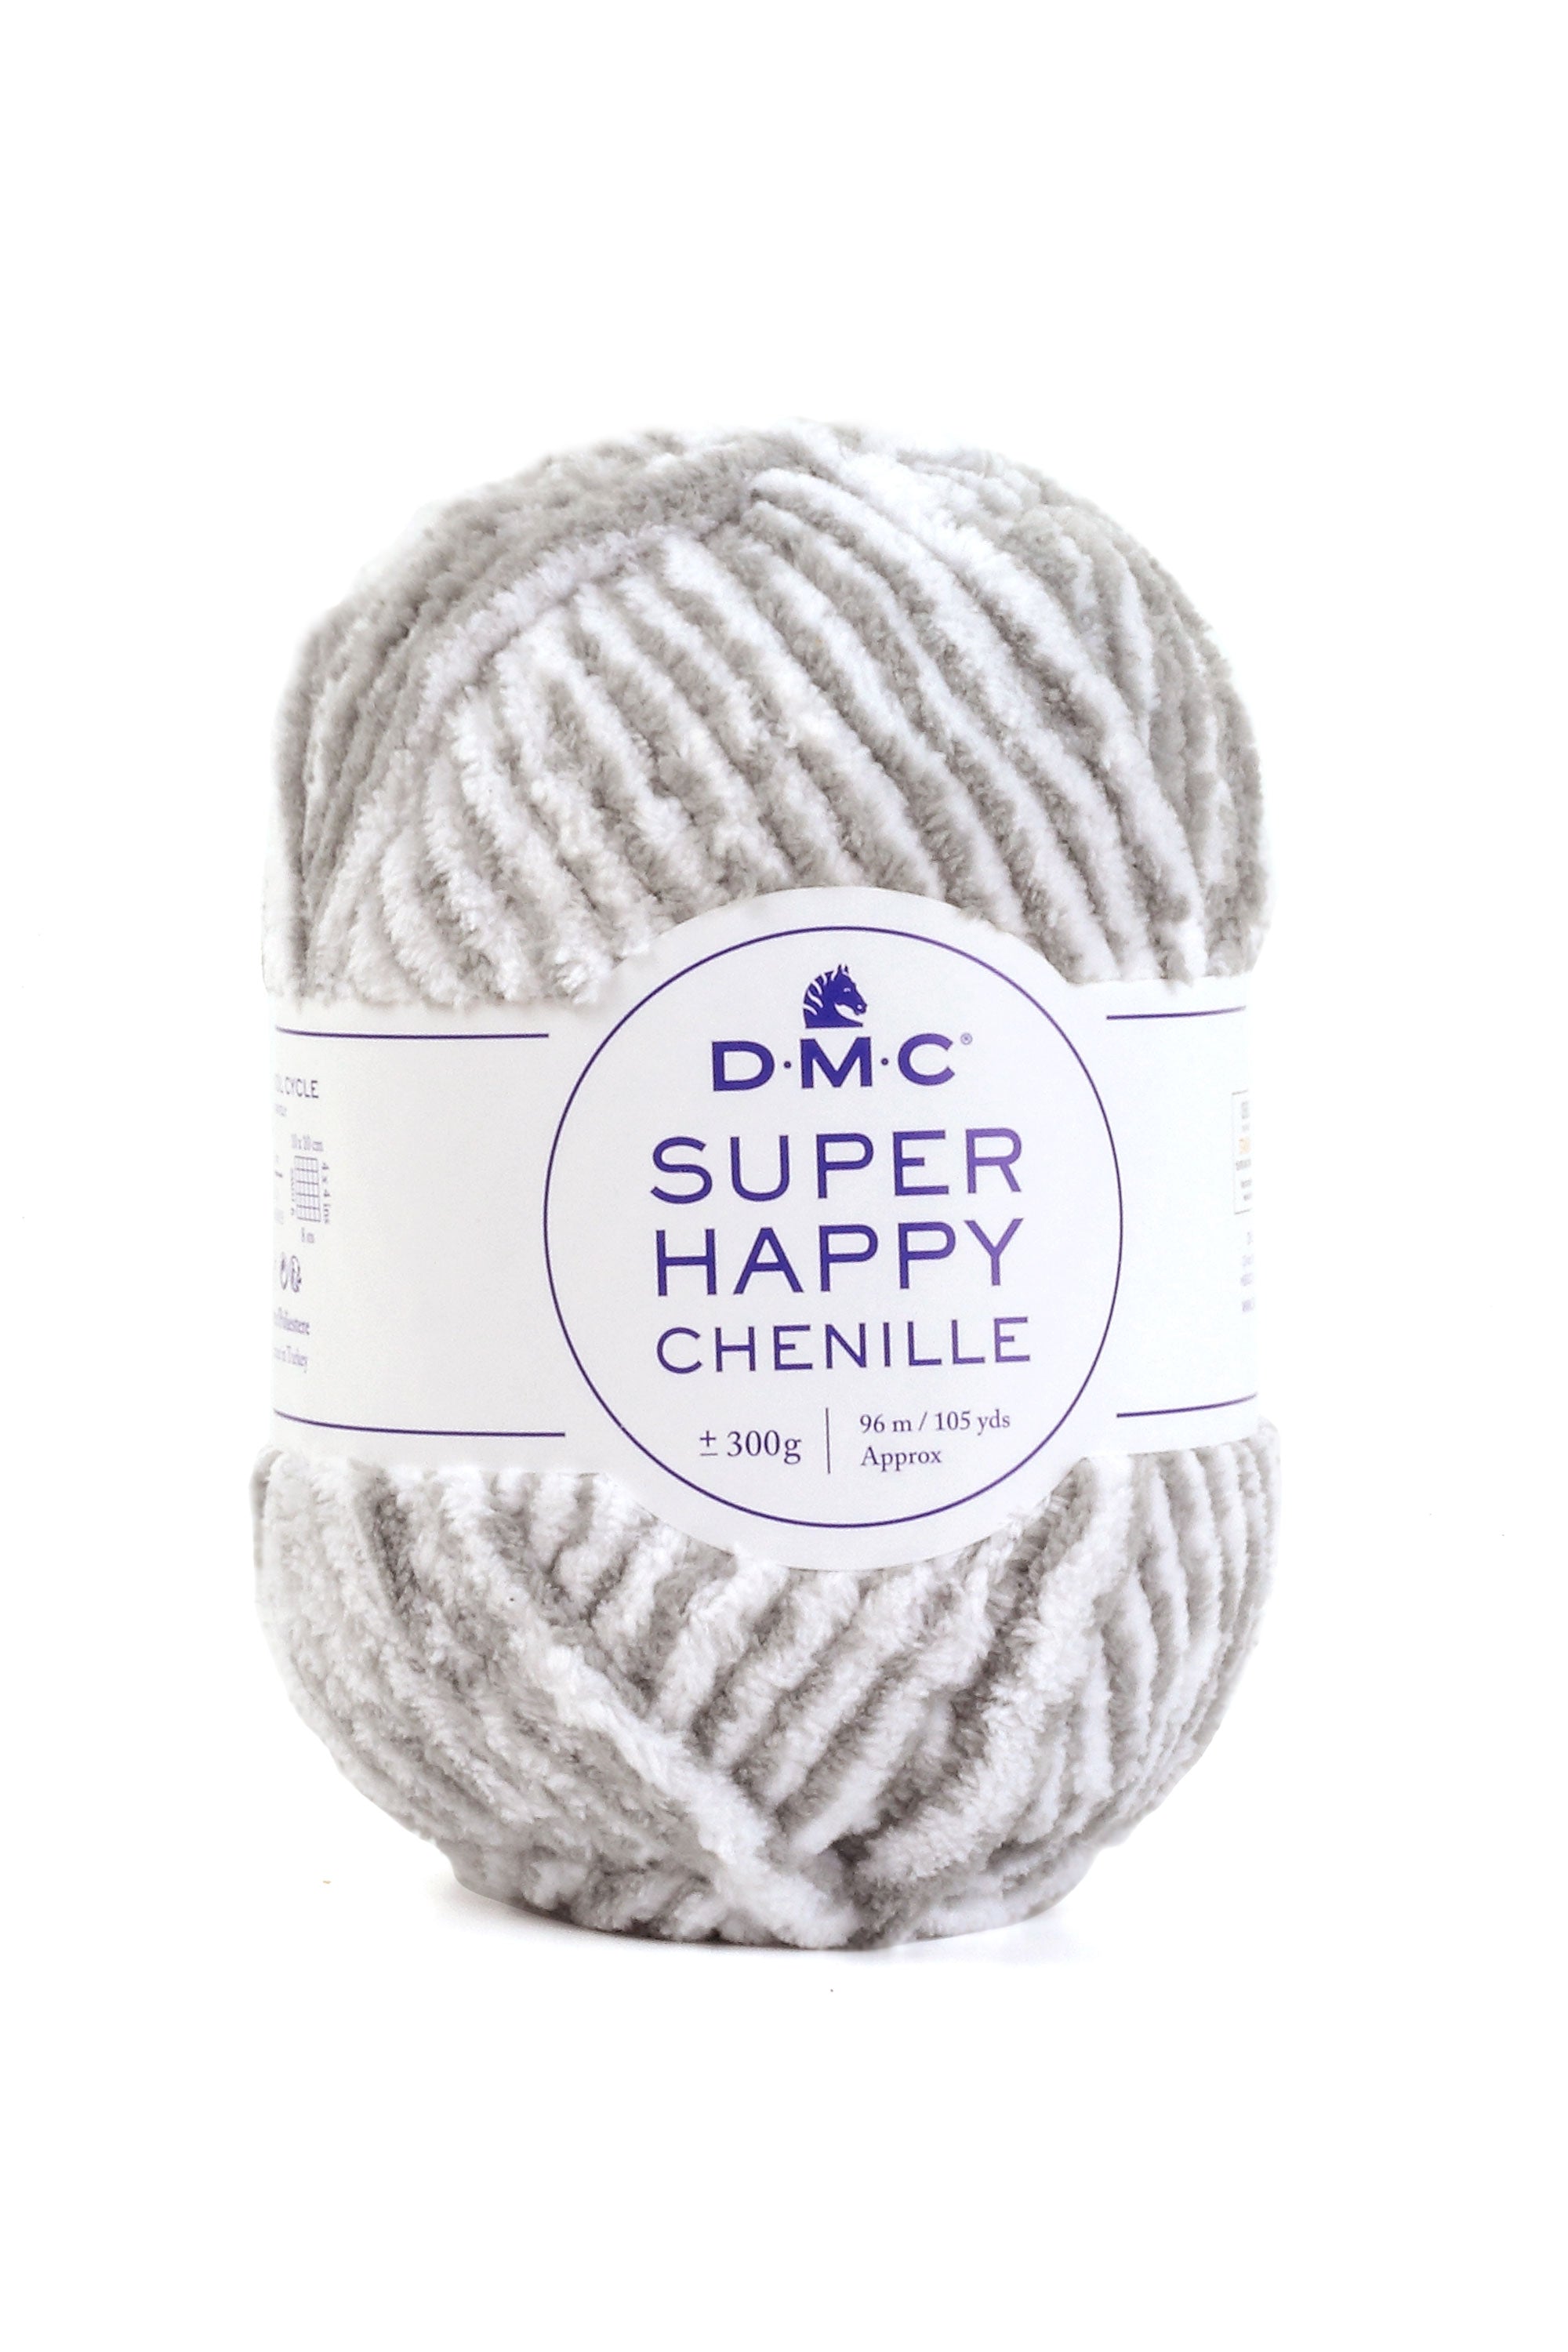 Super Happy Chenille from DMC: large ball of ball for giant amigurumis